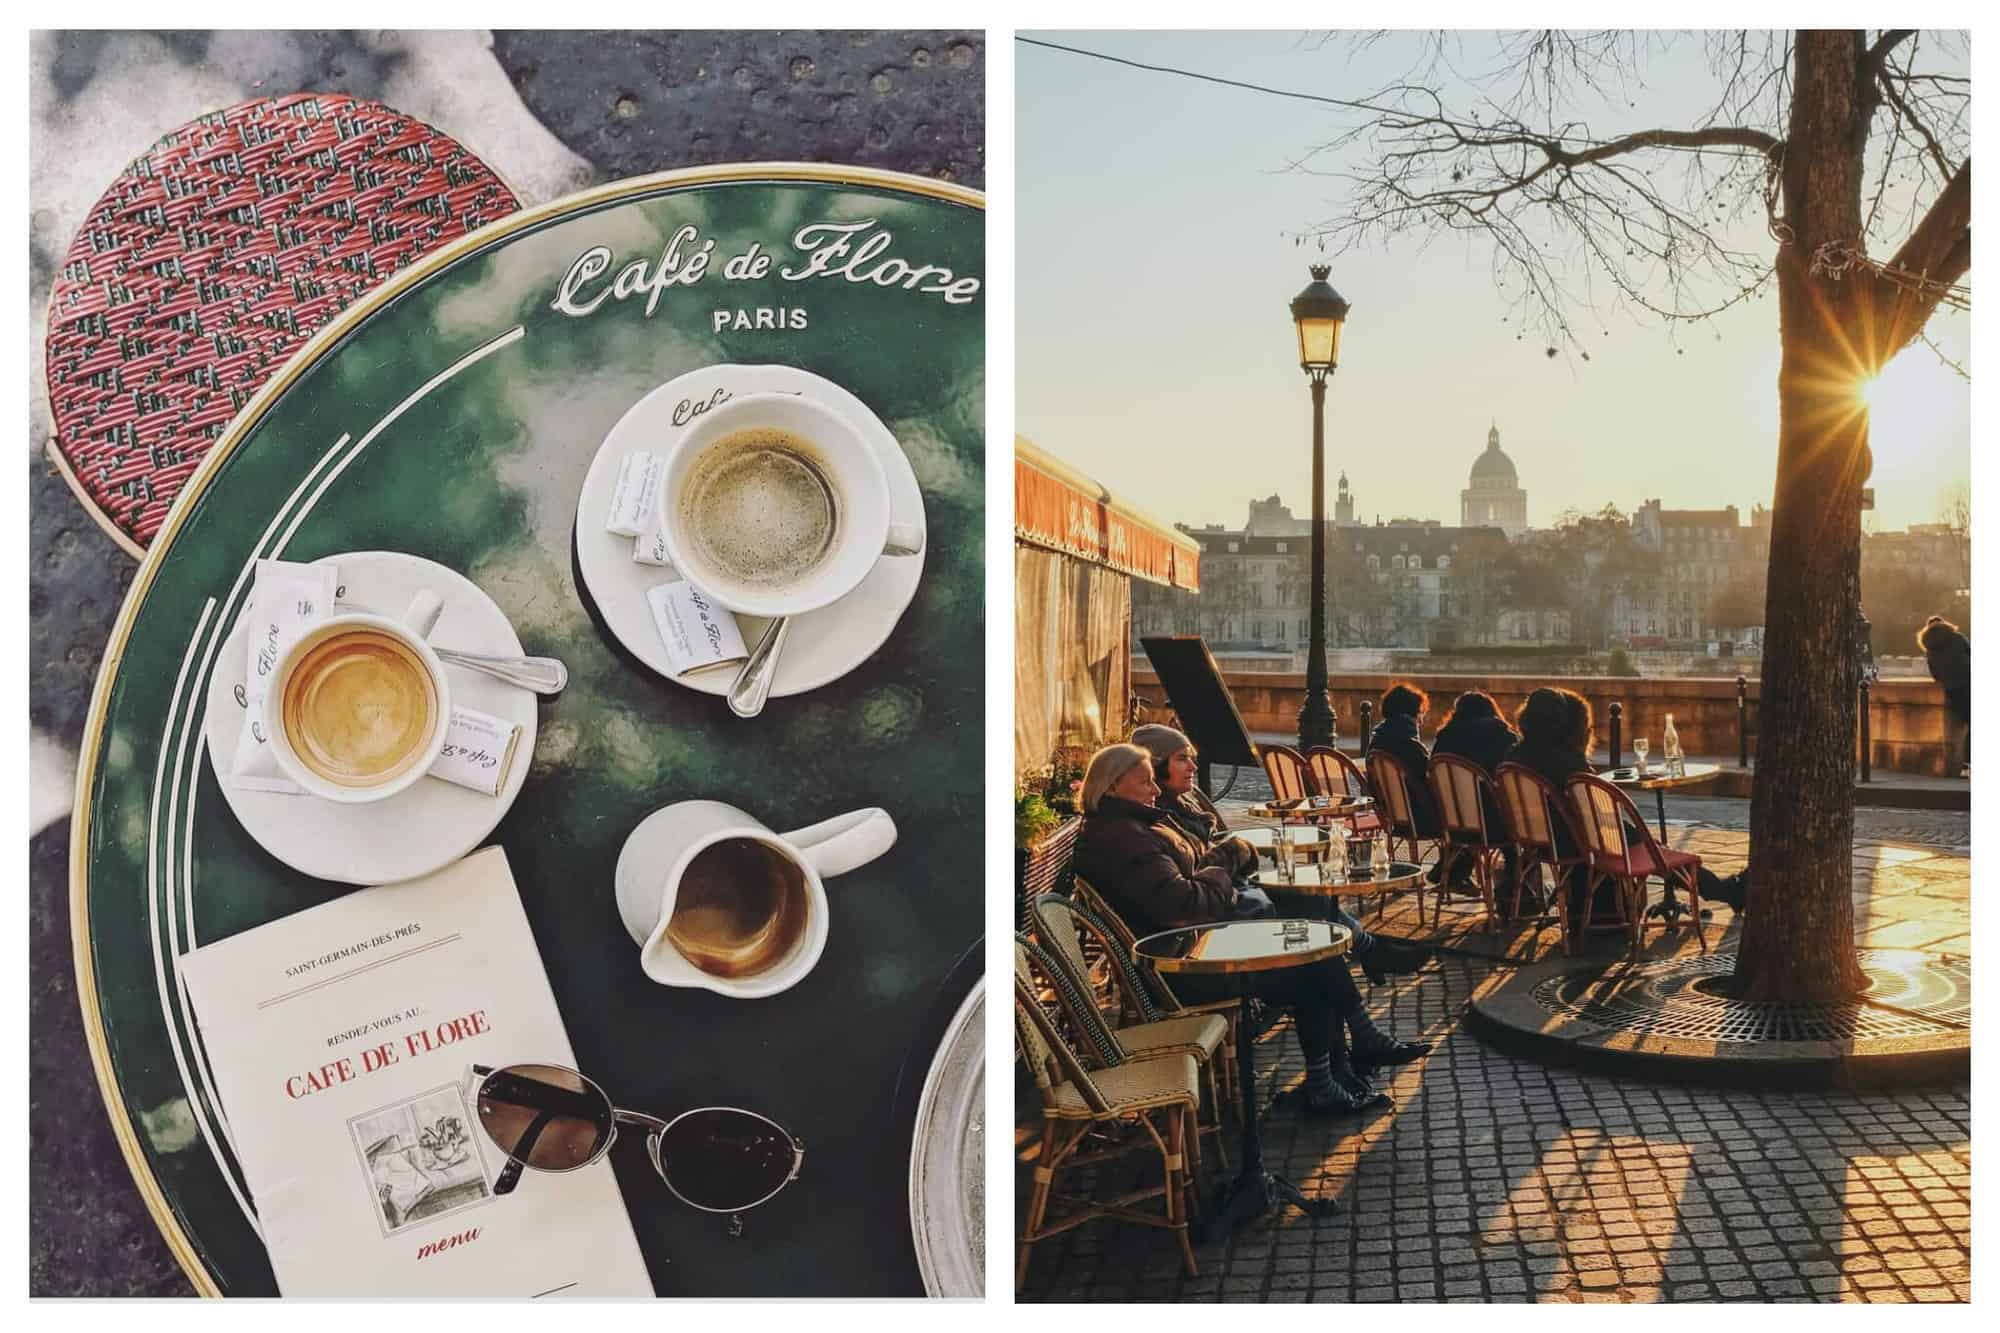 Left: a view from above a table at Café de Flore in Paris, with two coffees, a pair of sunglasses and a book sat on the table.